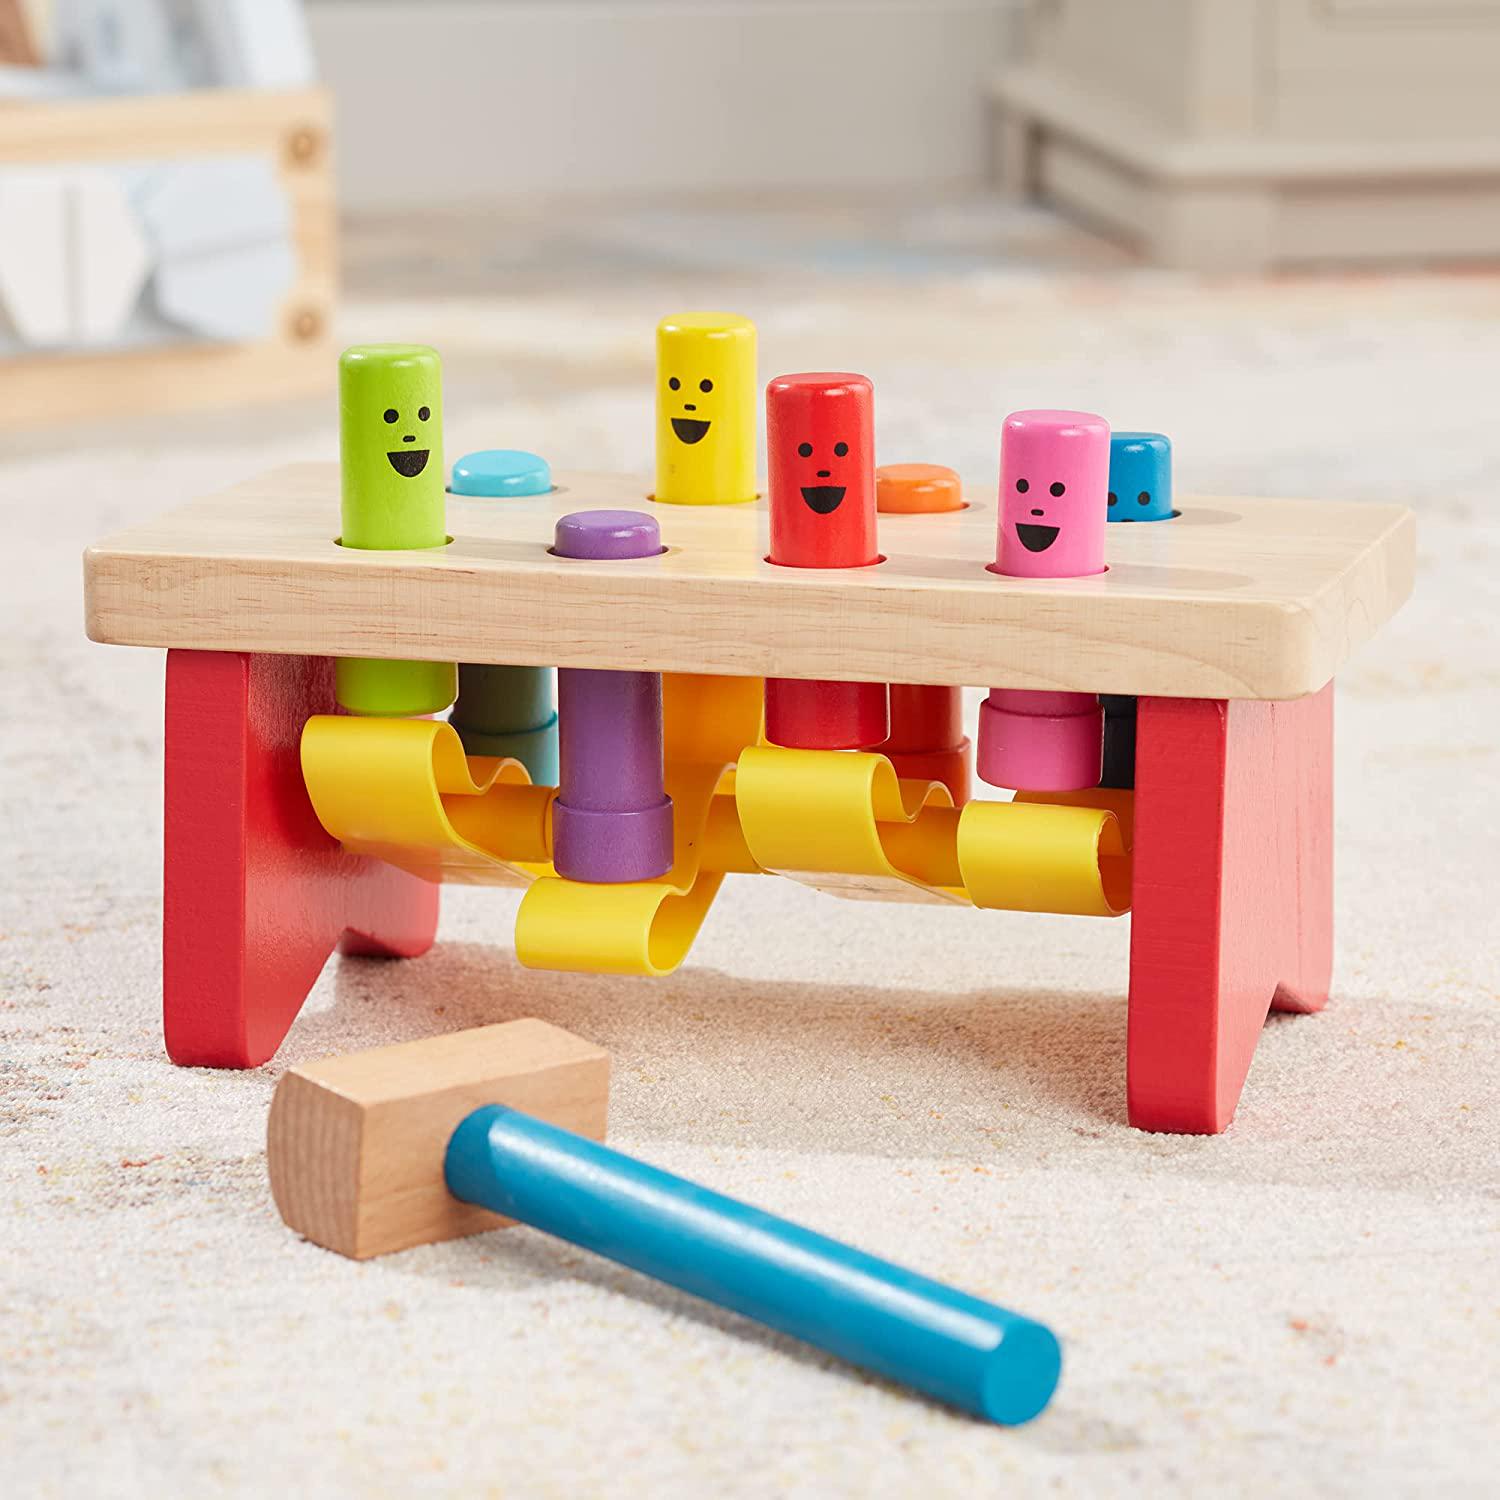 Melissa & Doug, Melissa and Doug 4490 Deluxe Pounding Bench Wooden Toy with Mallet, 10 x 5.25